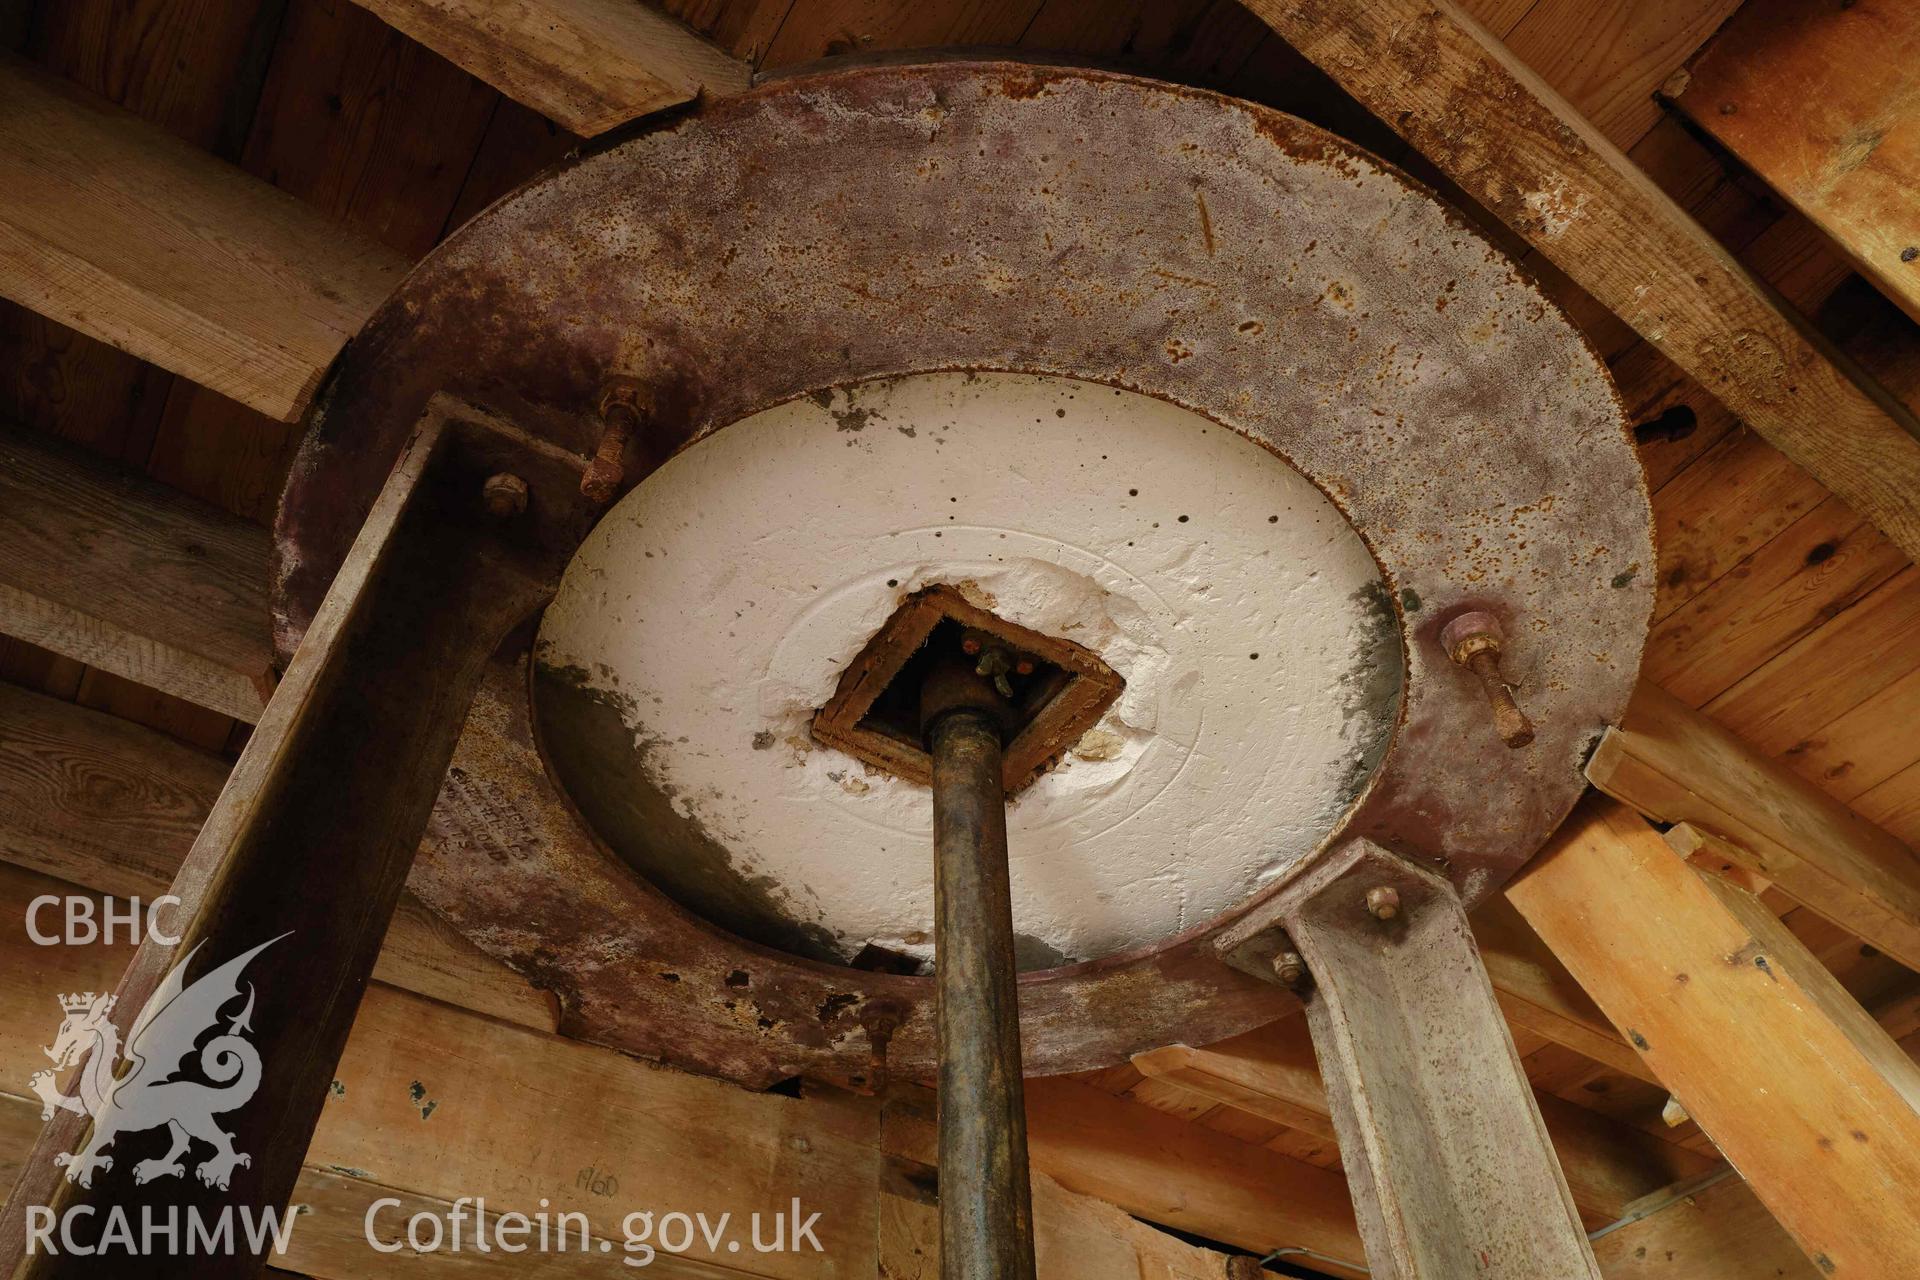 Colour photograph showing Blackpool Mill - ground floor, hurst frame supporting millstones. Produced as part of Historic Building Recording for Blackpool Mill, carried out by Richard Hayman, June 2021.